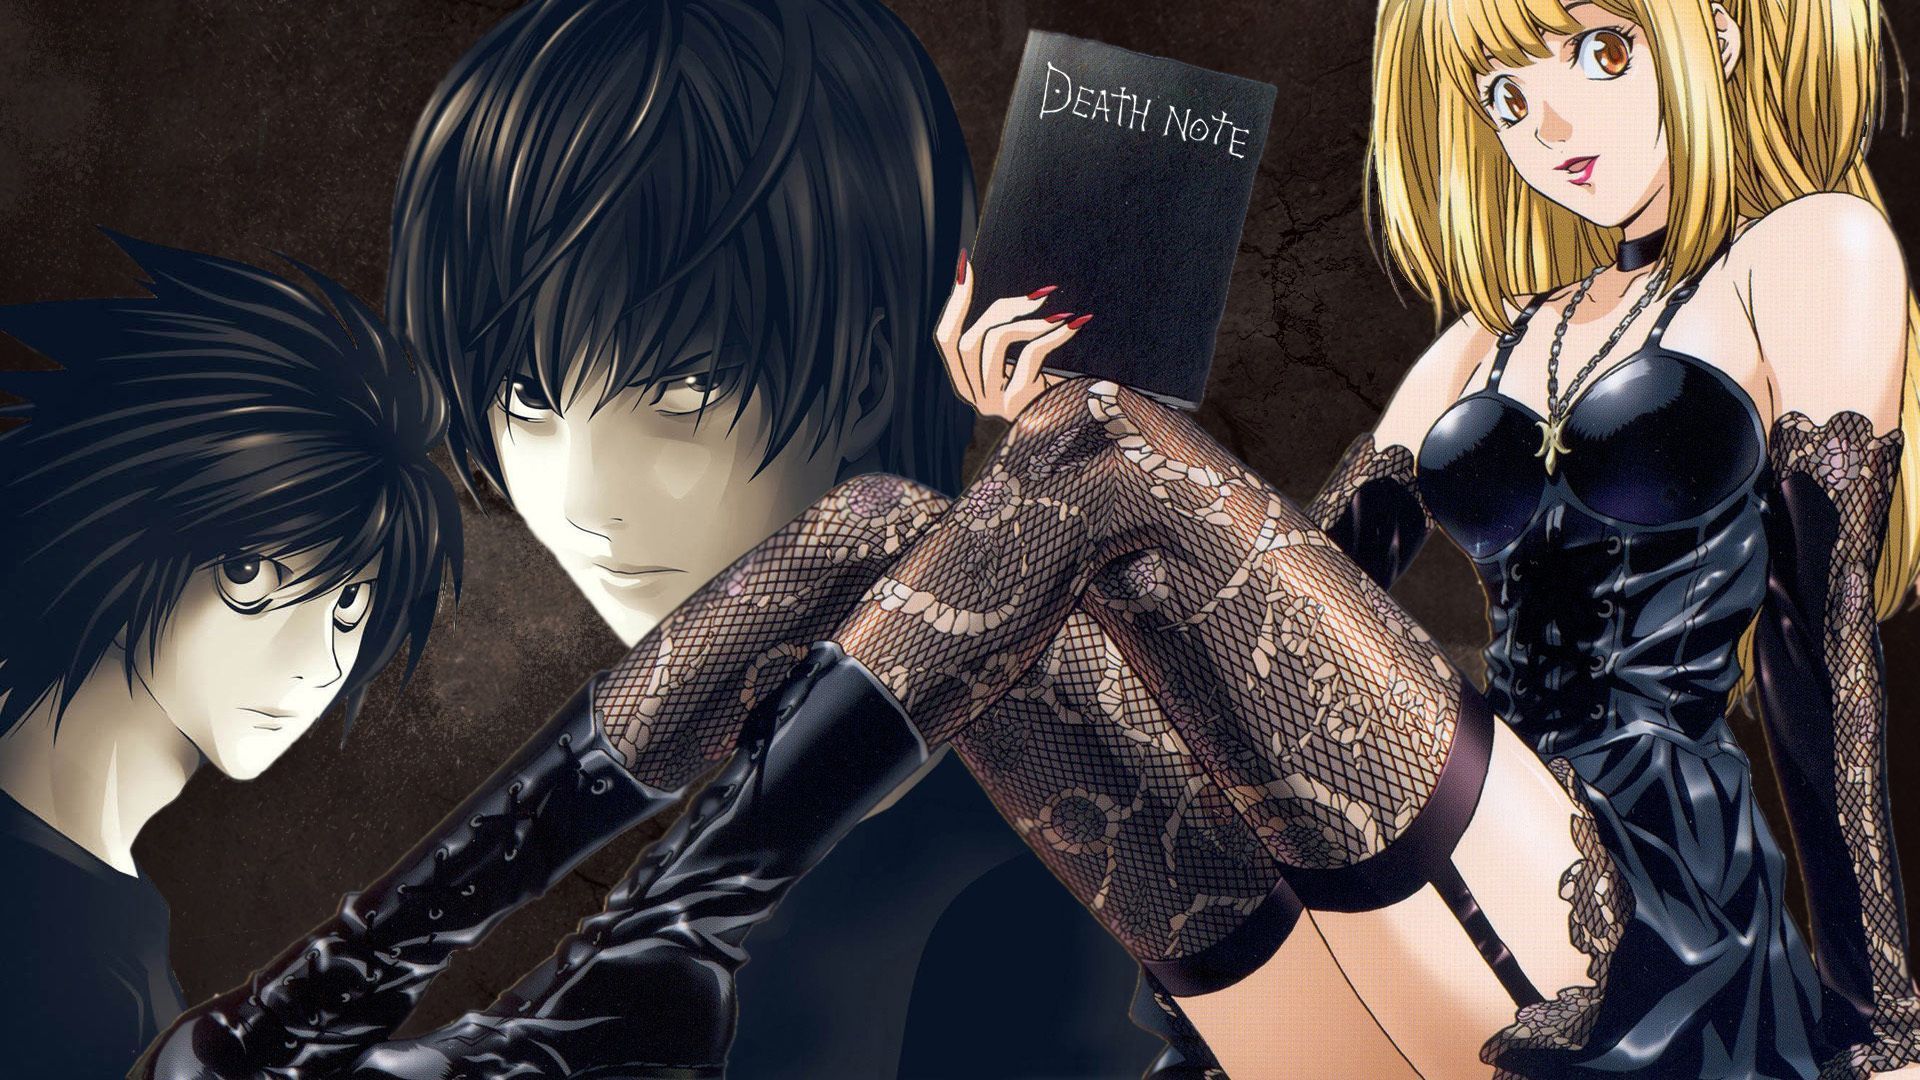 The death note